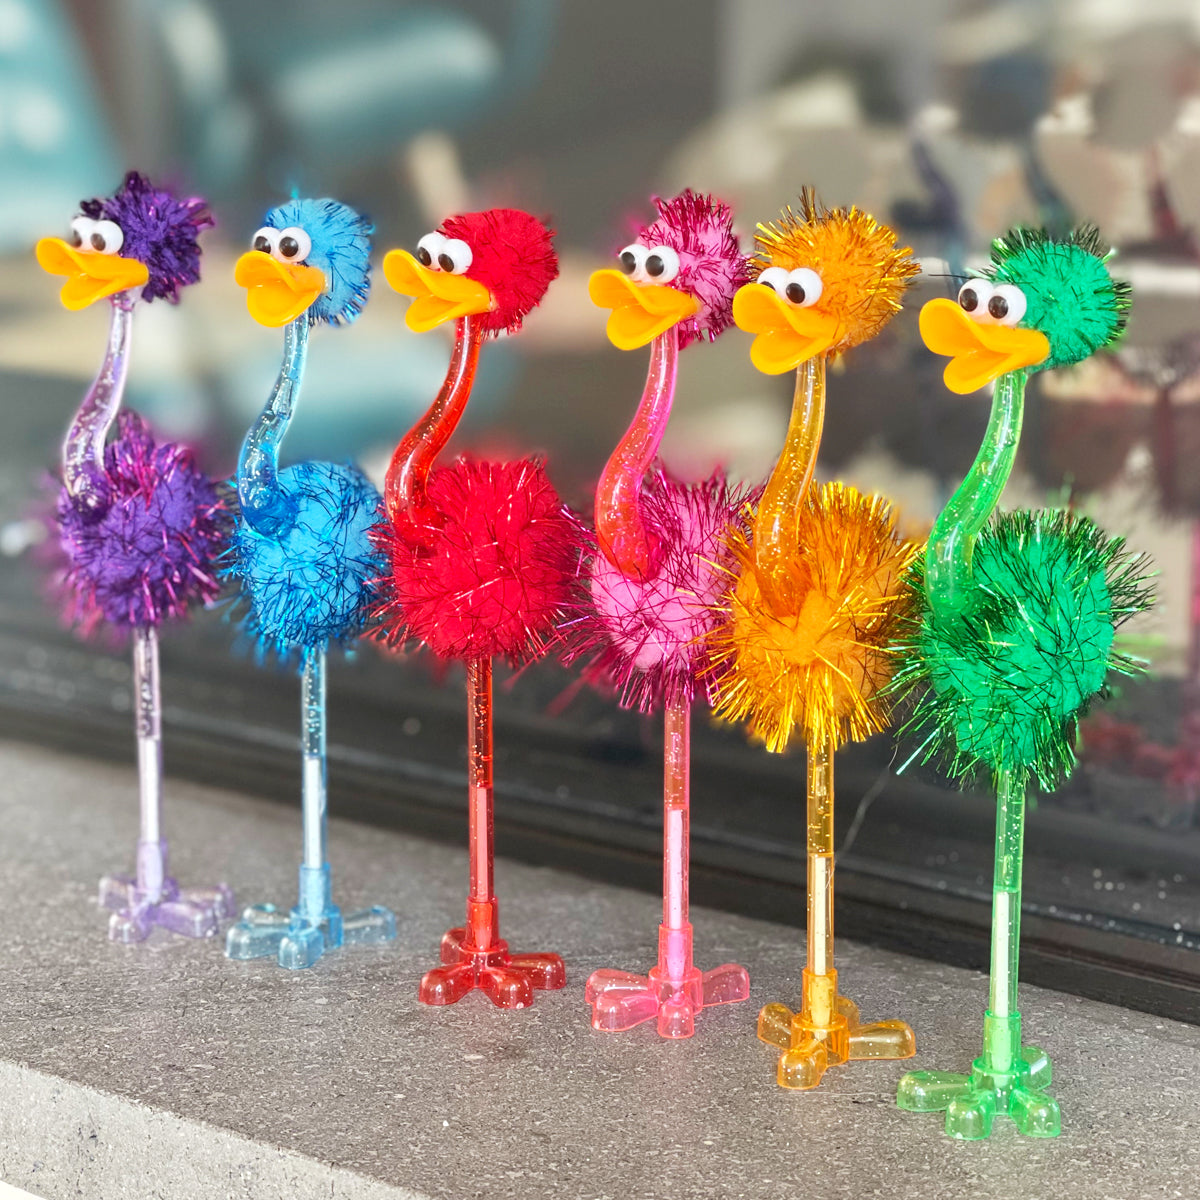 Wrapables Ostrich Ballpoint Pens, Novelty Pens for Office and Party Favors (Set of 6)